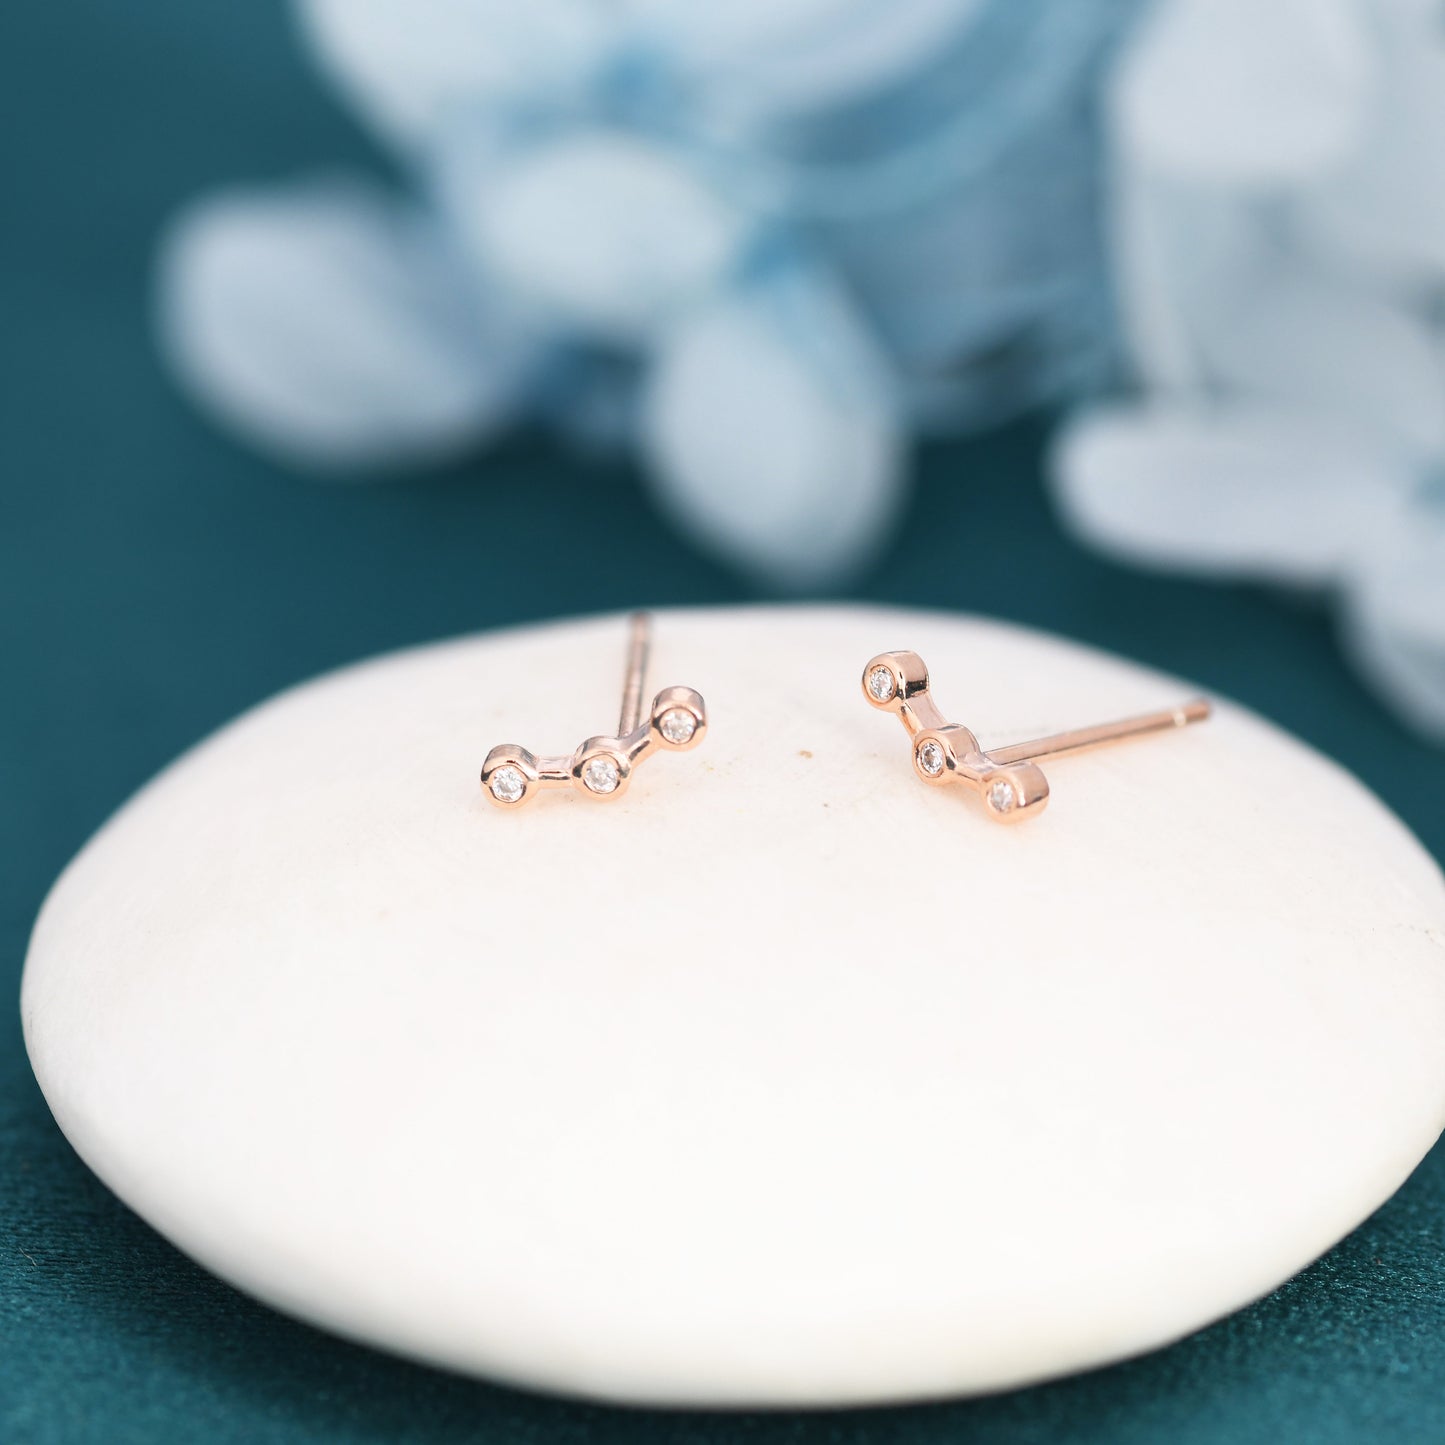 Sterling Silver Three Dot Stud Earrings, CZ Trio Constellation Design, Rose Gold Coated Silver, Dainty and Delicate Tiny Jewellery